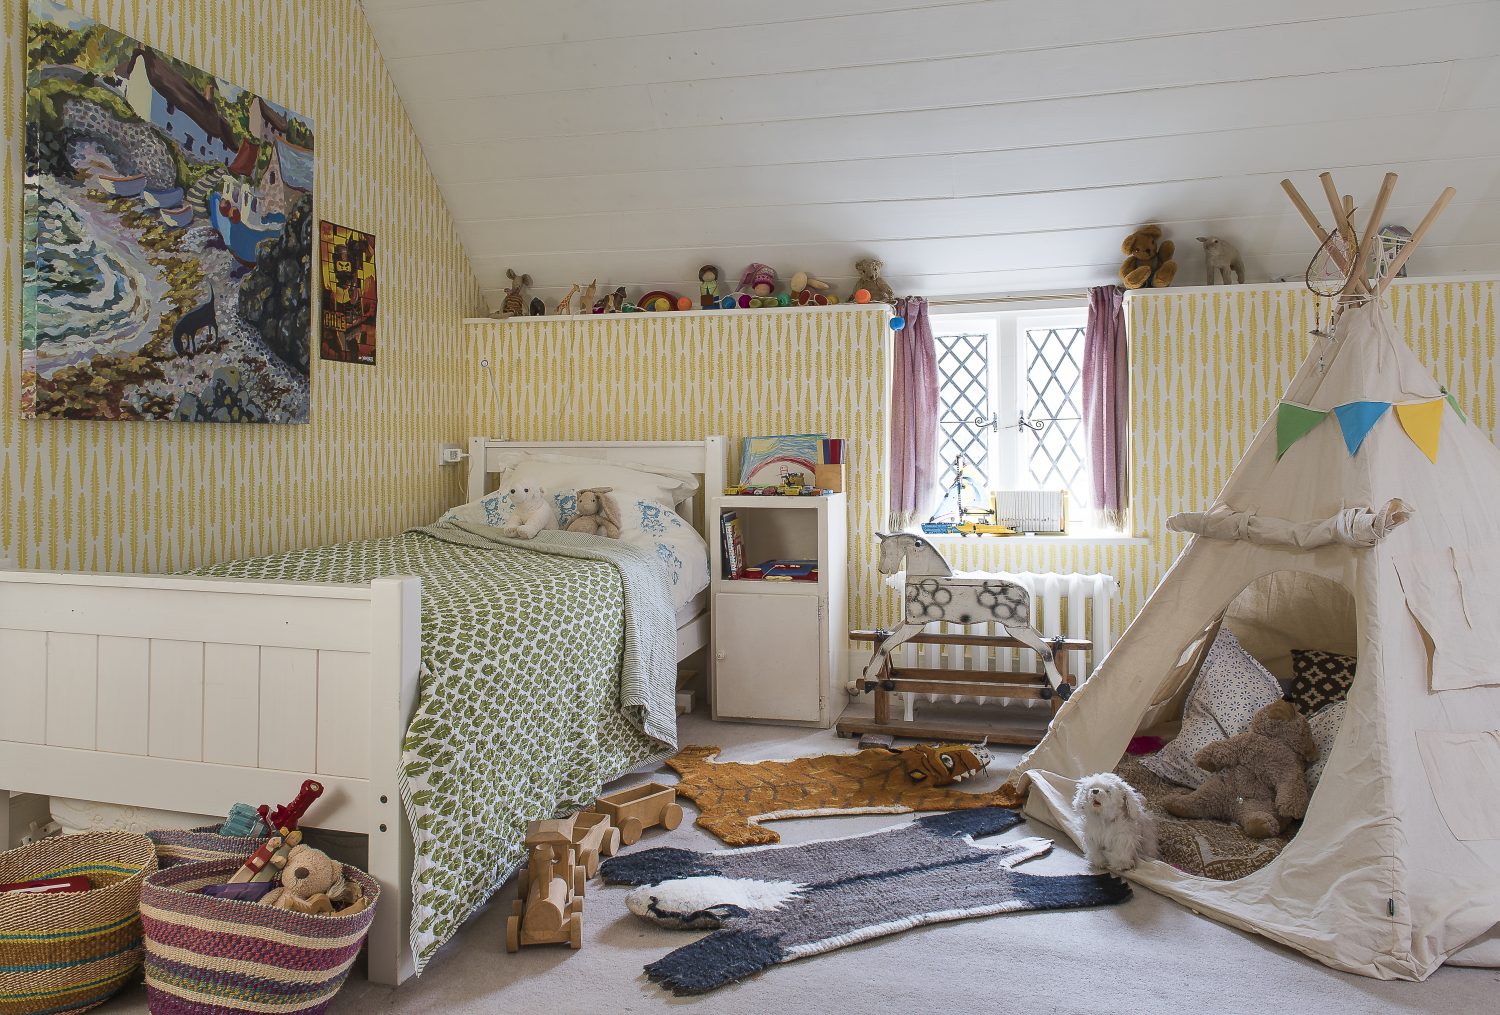 Youngest child, Orlando’s bedroom. The wallpaper is Fern. The quilt is also by Molly Mahon